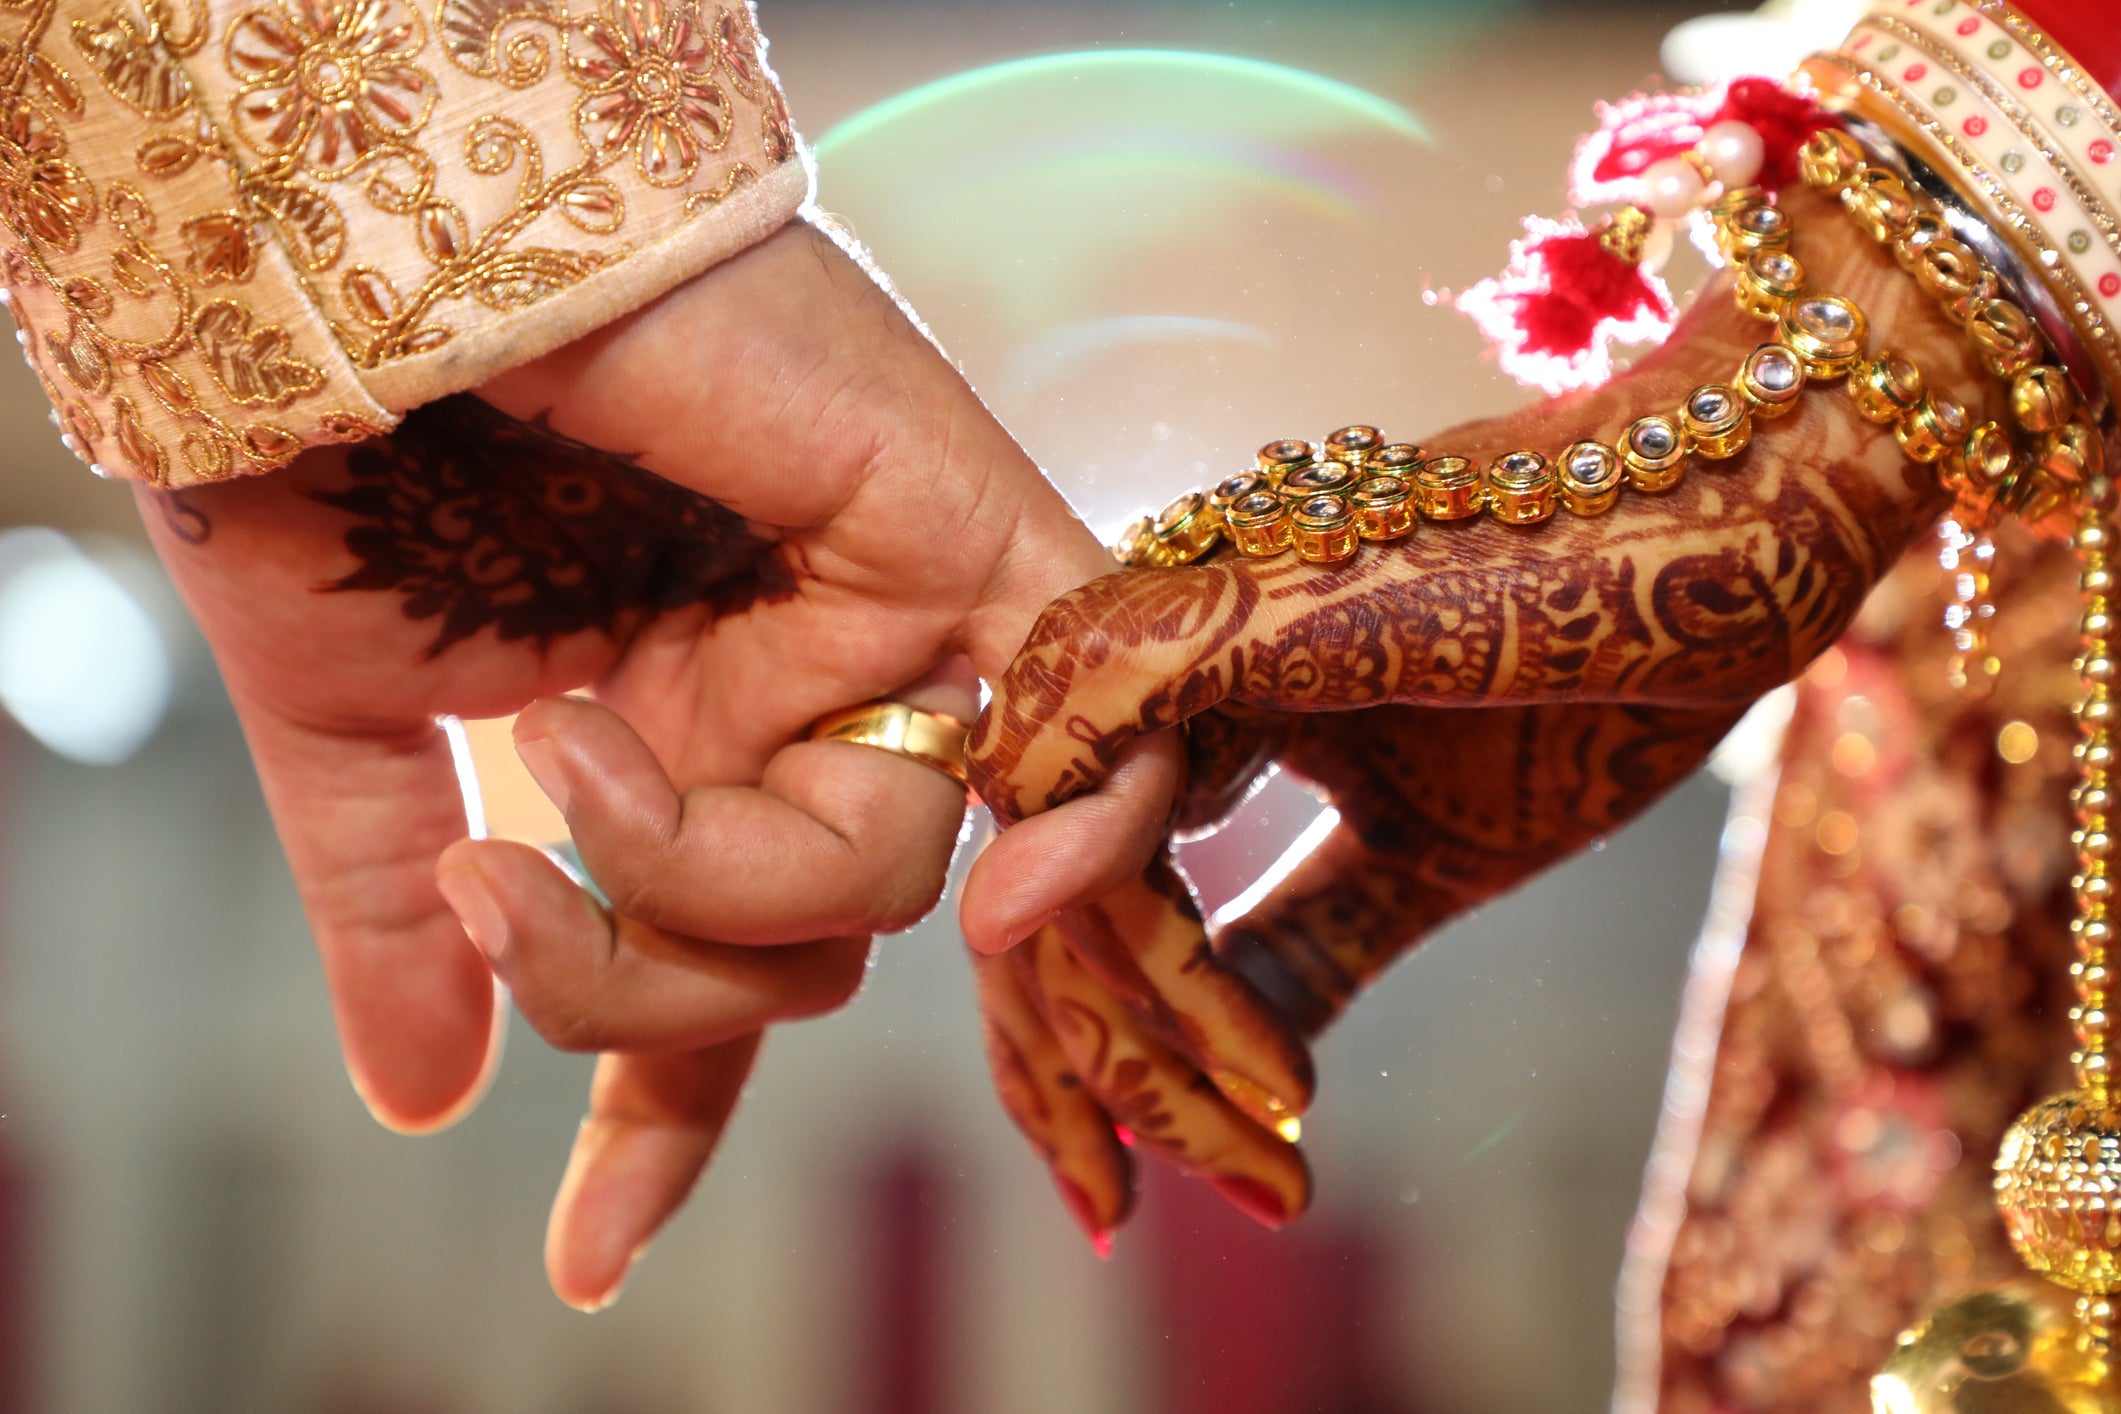 Indian Businesswoman Goes Viral After Offering Arranged Marriage Match